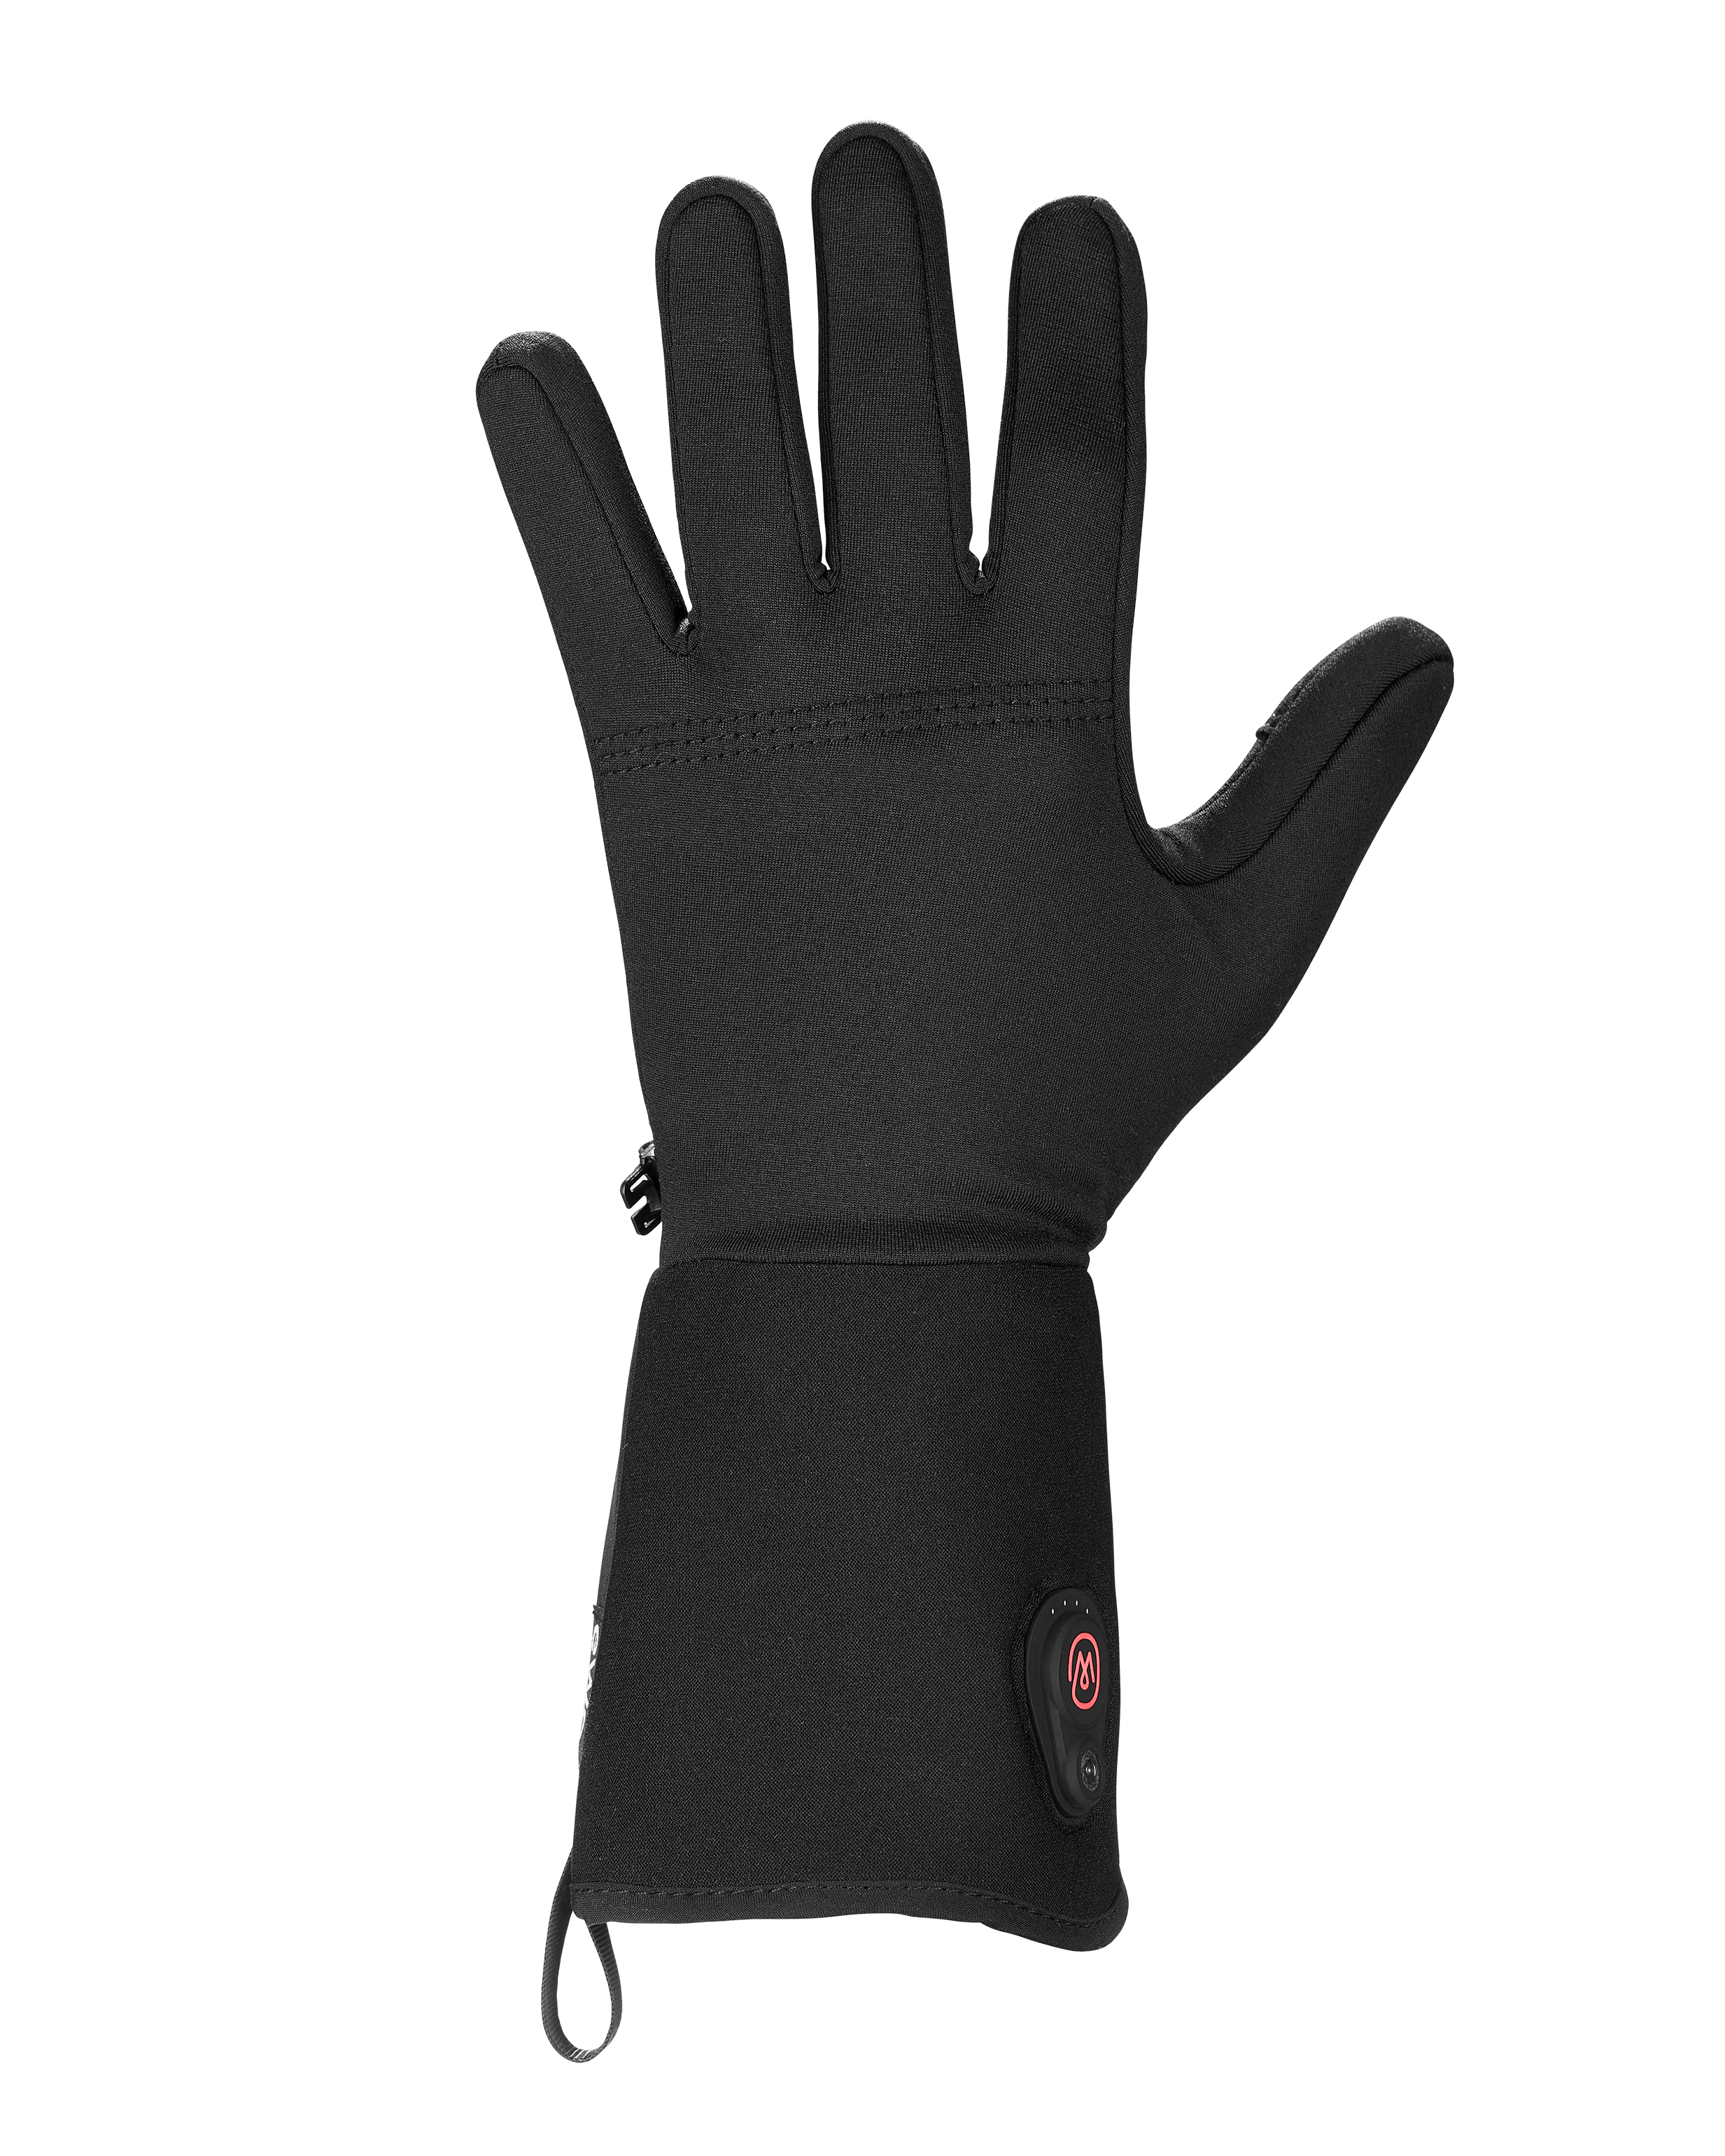 Heated Glove Liners with SnapConnect™